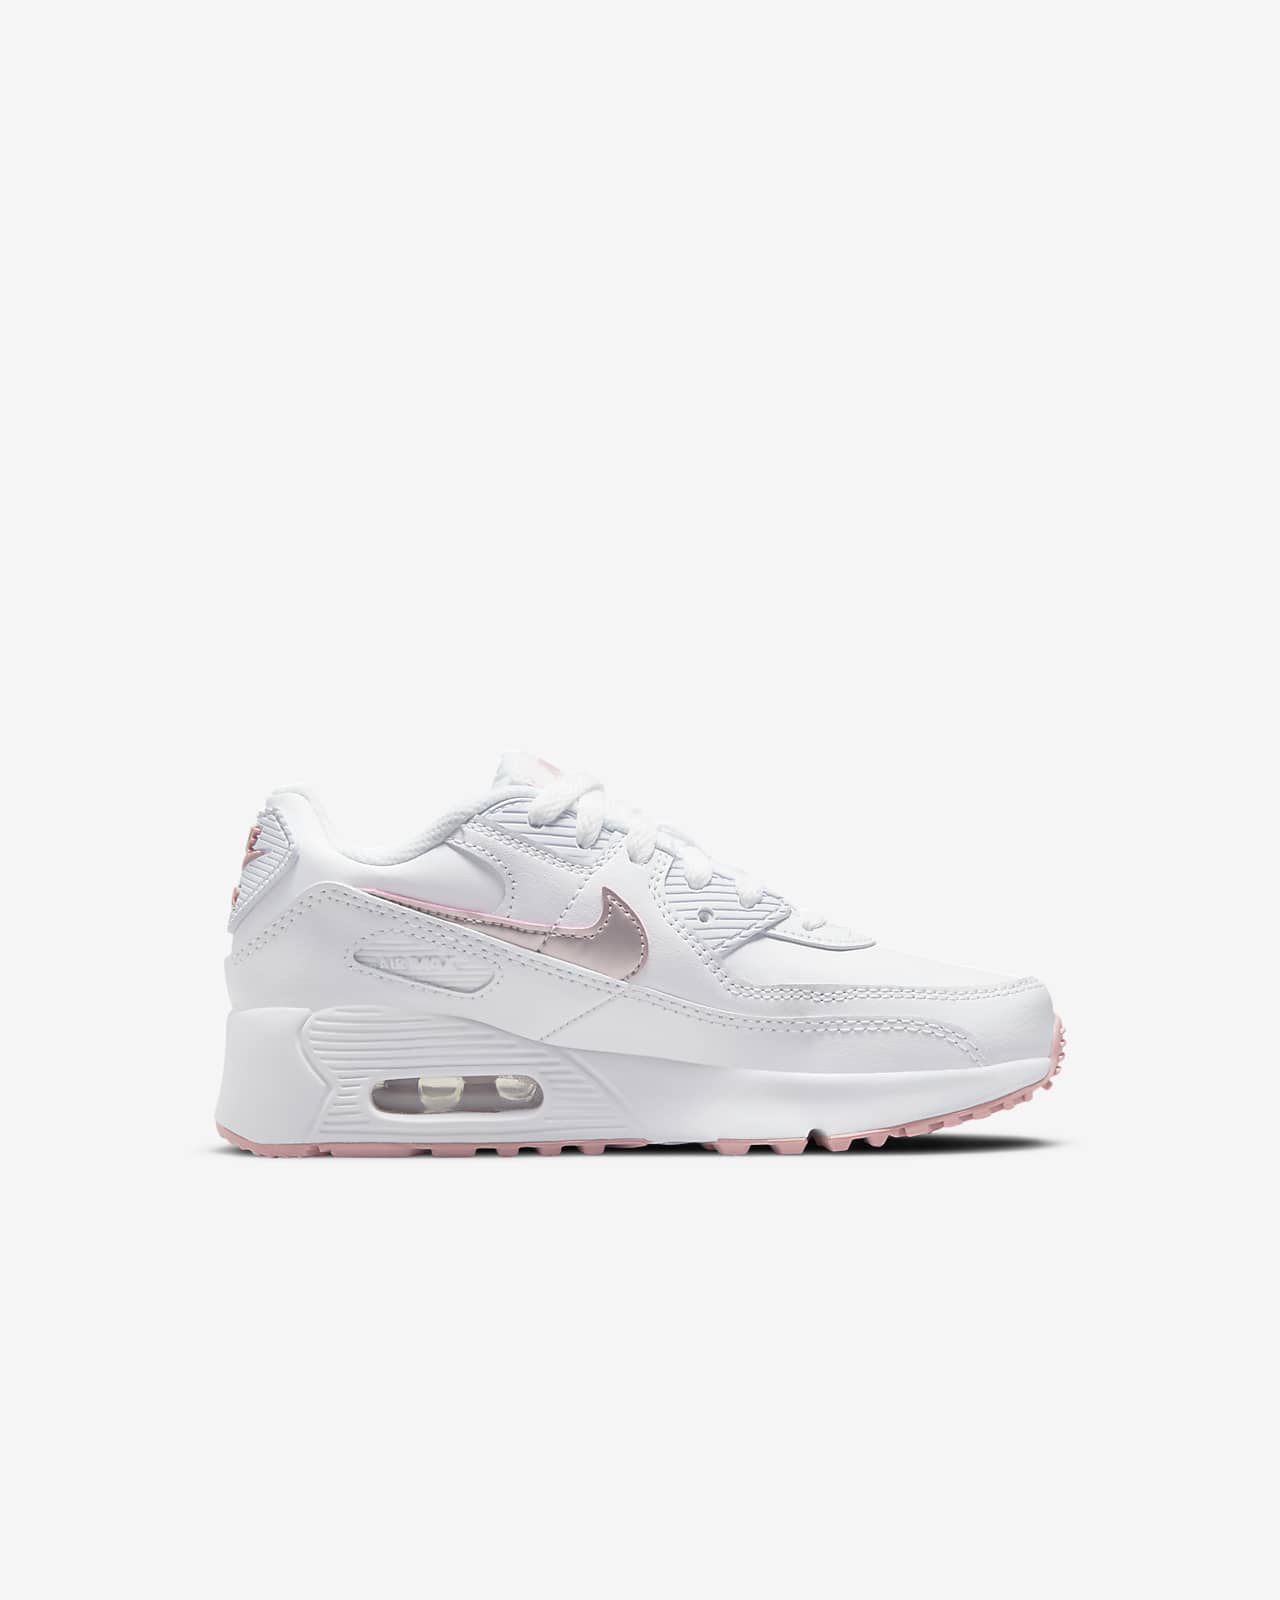 oor Analytisch Misbruik Nike Air Max 90 LTR Younger Kids' Shoes. Nike LU